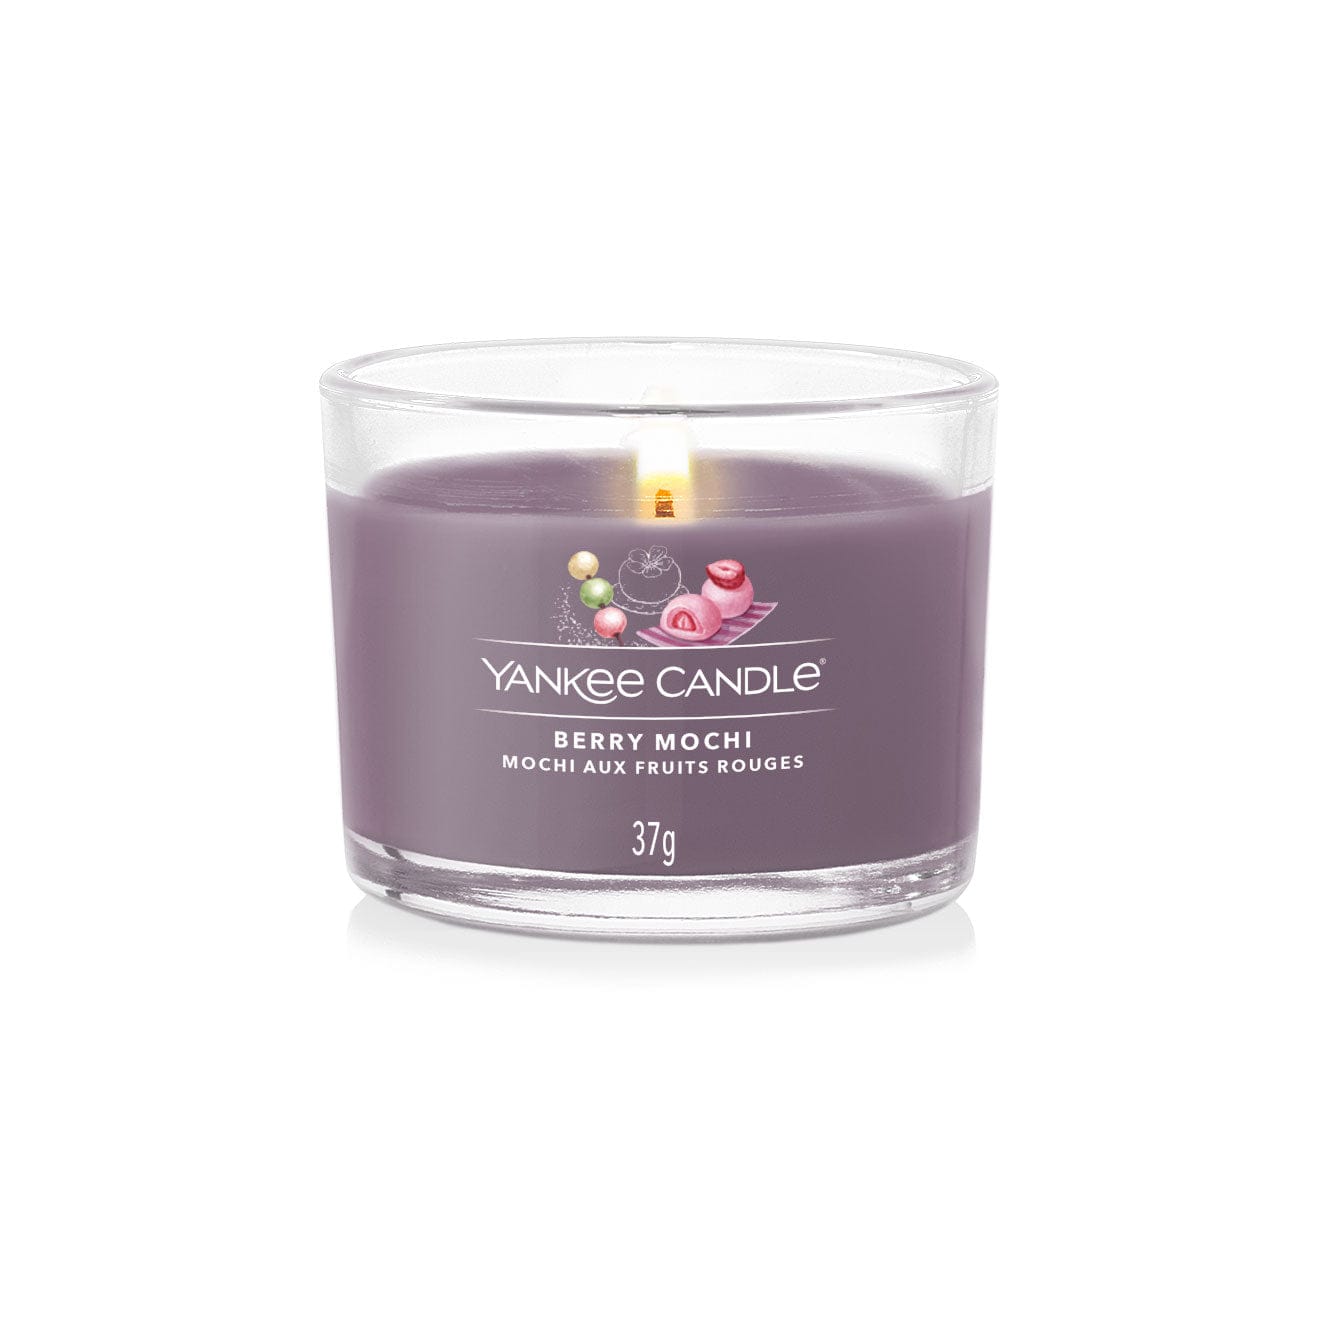 Yankee Candle Votive Candle Yankee Candle Filled Glass Votive - Berry Mochi